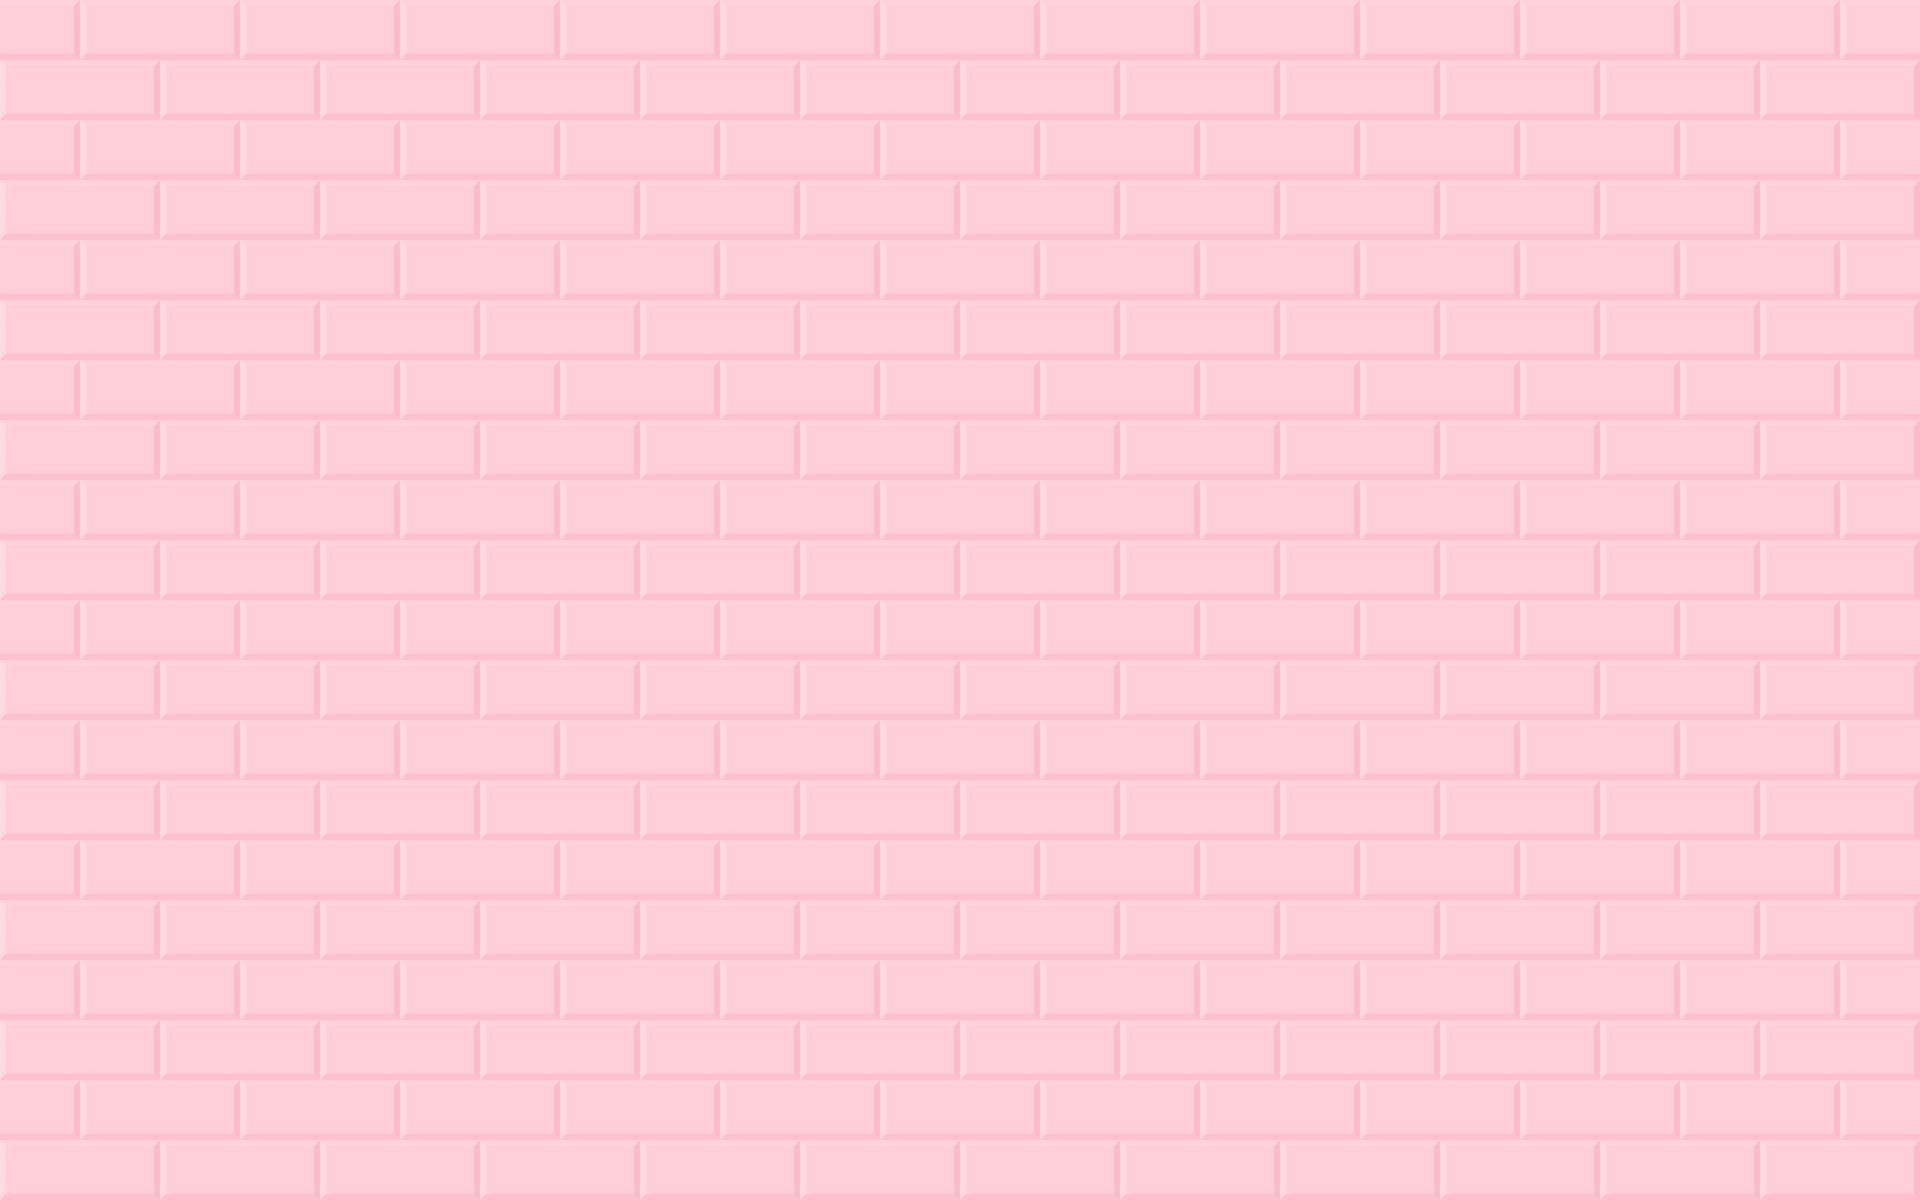 1920x1200 Pink brick wall background. Abstract geometric seamless pattern design. Vector illustration. Eps10 6975057 Vector Art